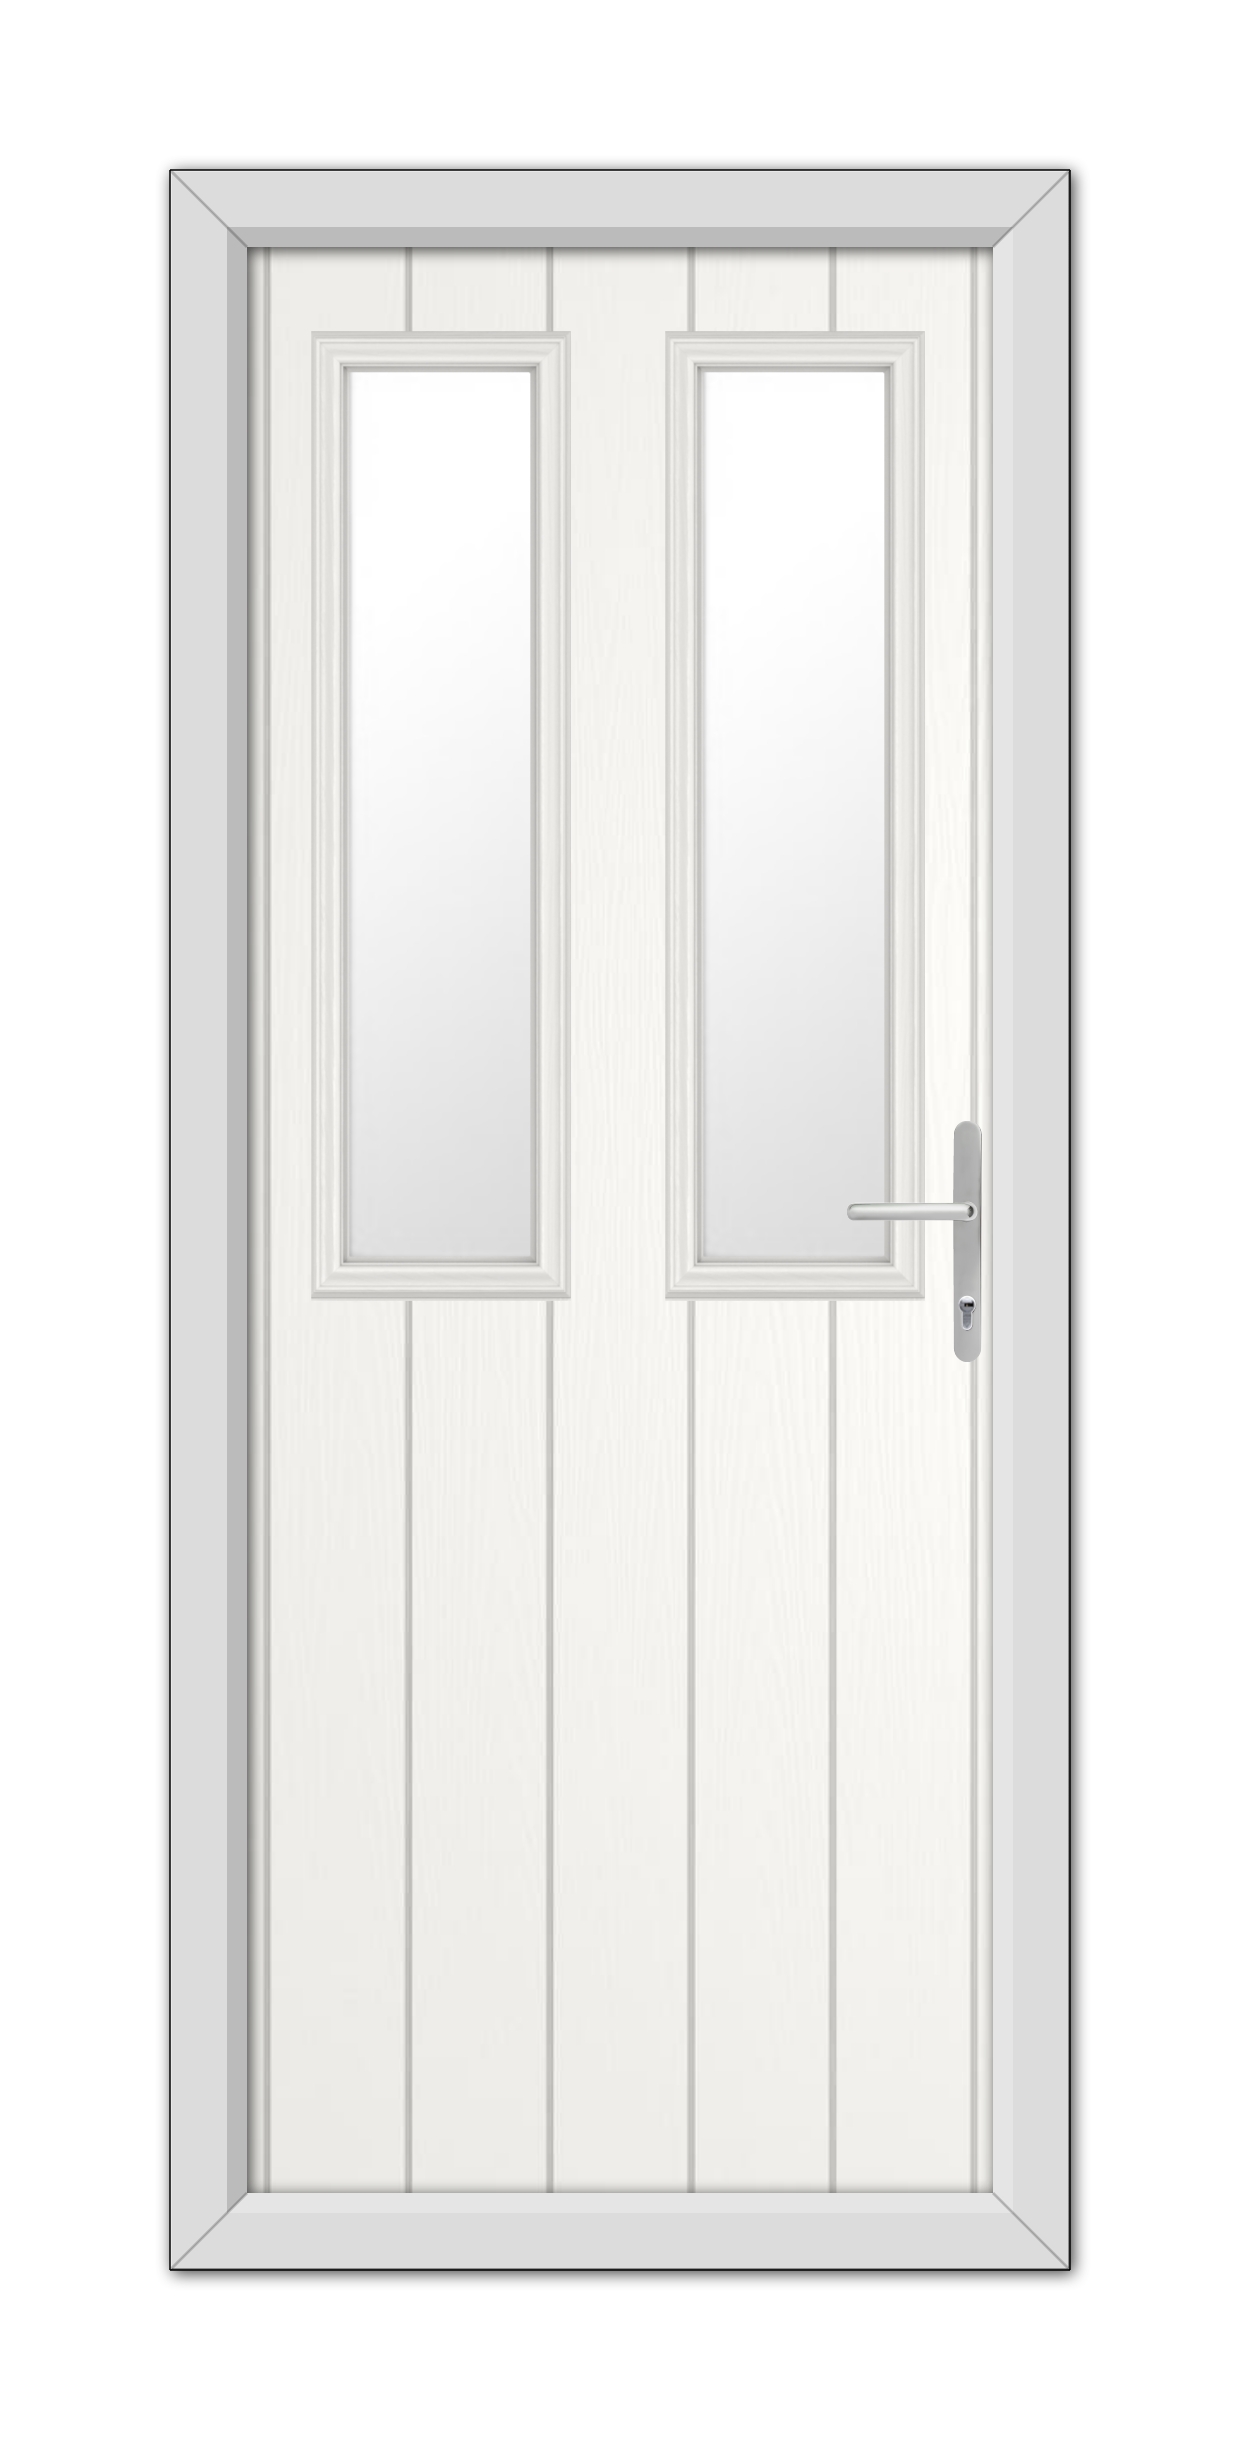 A double White Wellington Composite Door 48mm Timber Core with glass panels and a modern handle, set within a simple frame.